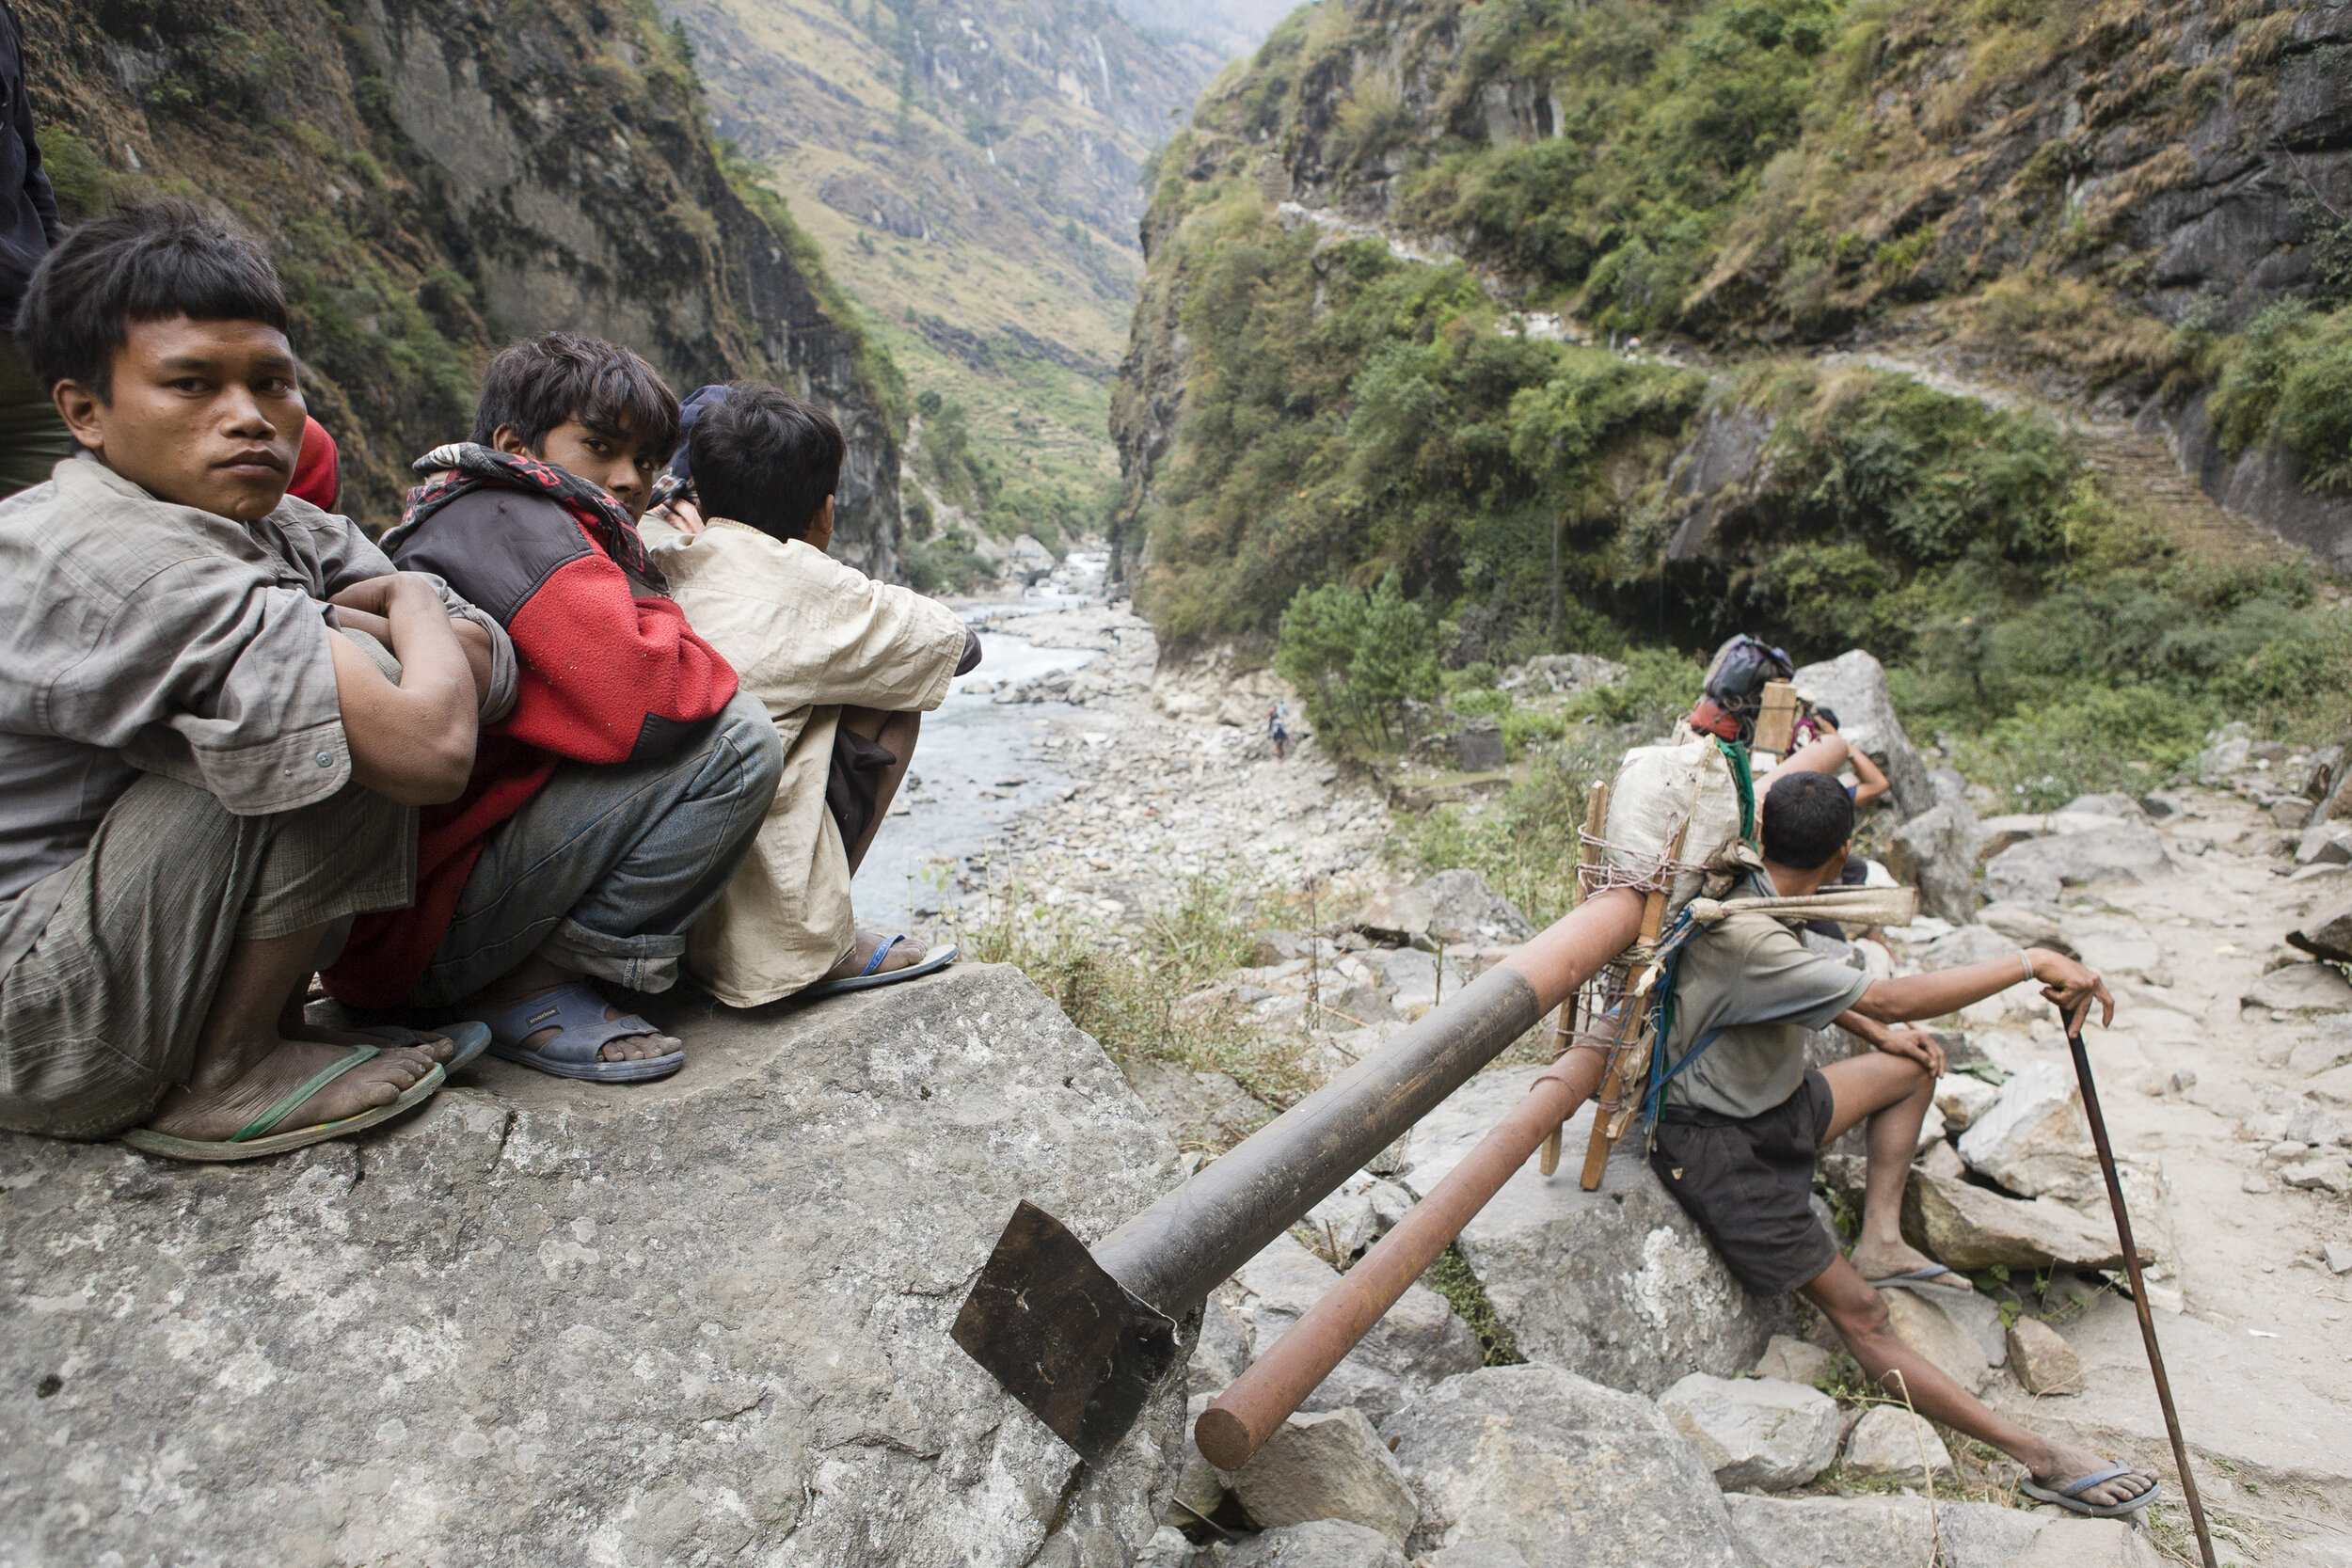  Nepali porters wait until workers dynamite rock along the Annapurna Circuit trail, near Tal. One carries telephone poles by bearing the weight on a strap placed on his forehead. Many porters wear plastic flip-flops while carrying heavy and awkward l